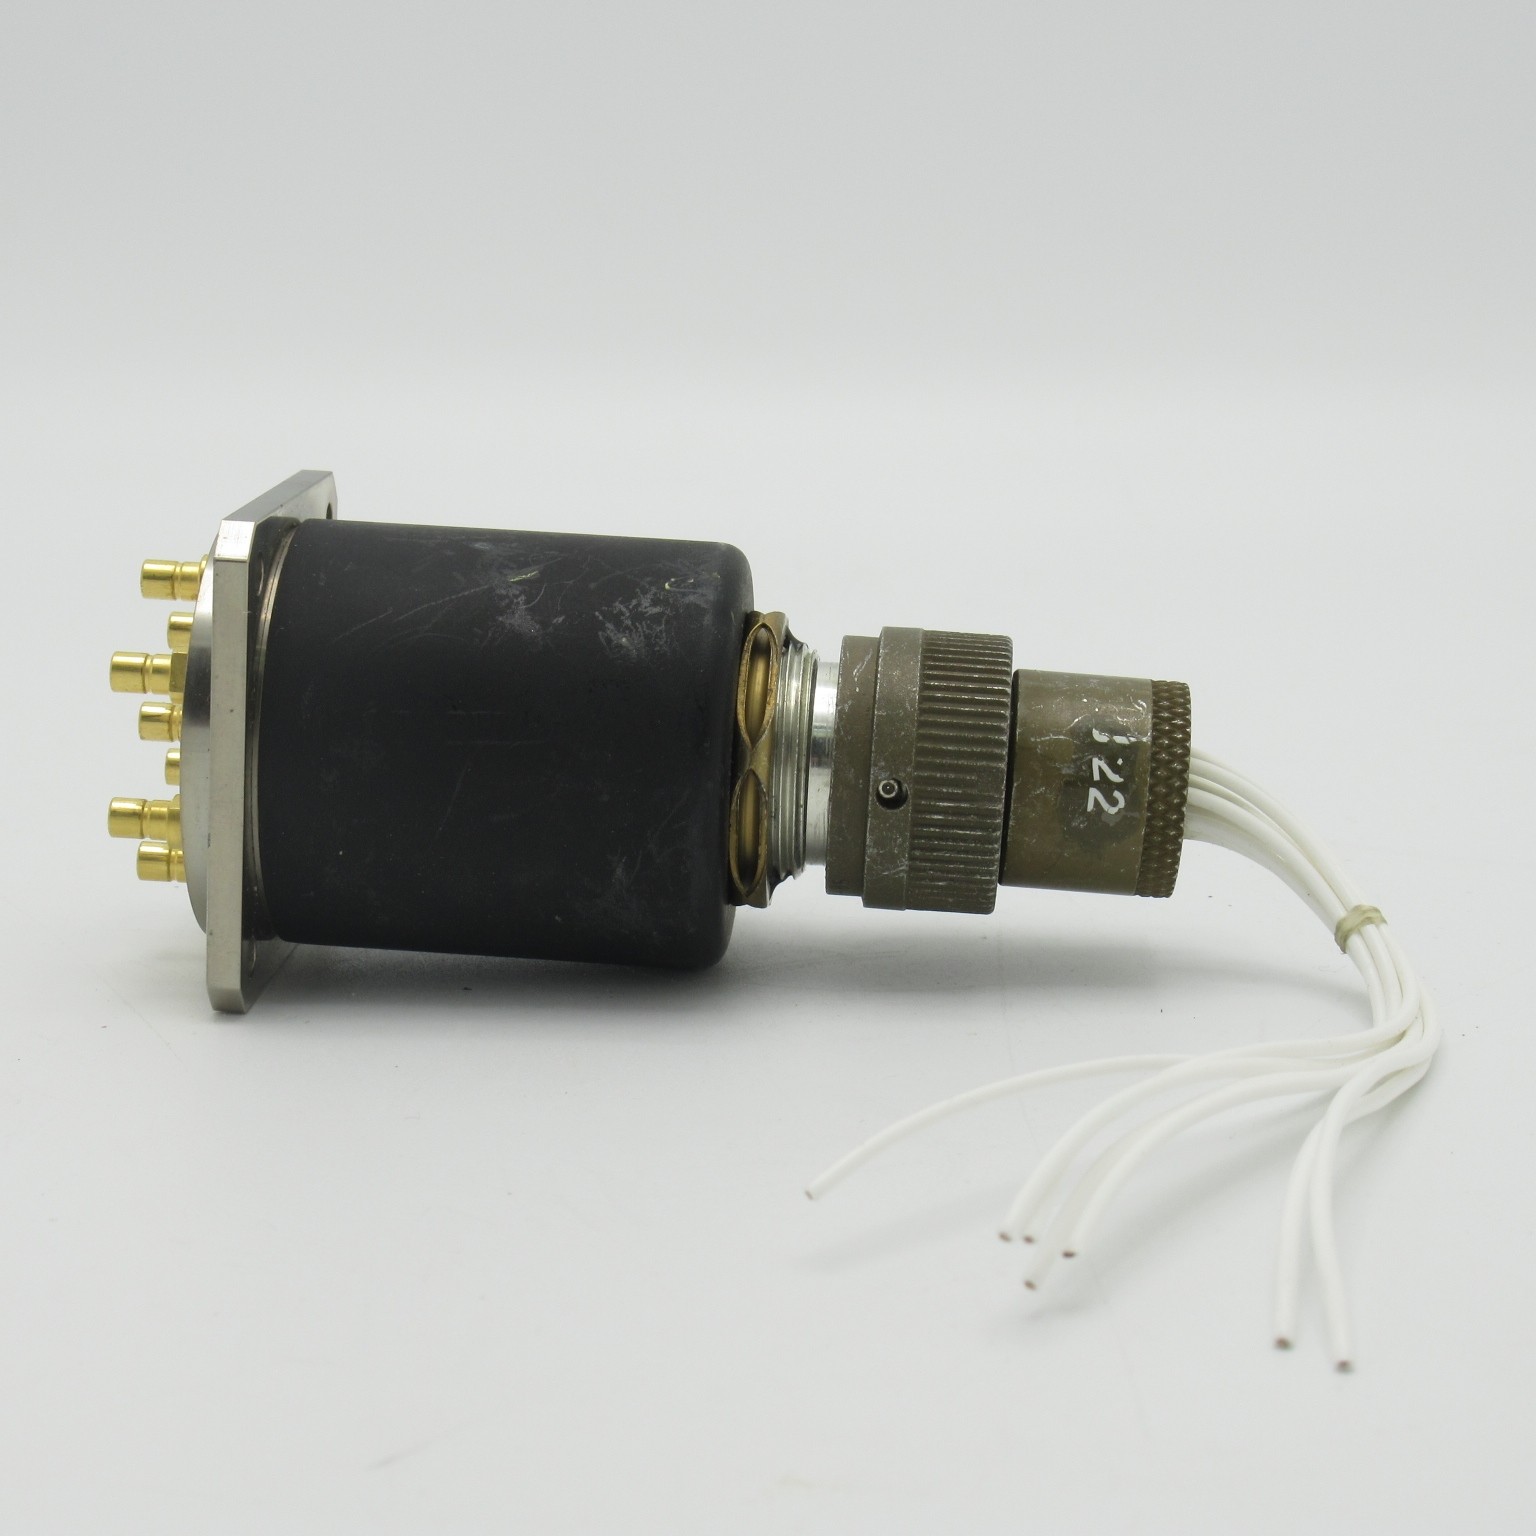 Details about   28V SP6T 6 WAY SMB COAXIAL SWITCH 82152-146C90500 